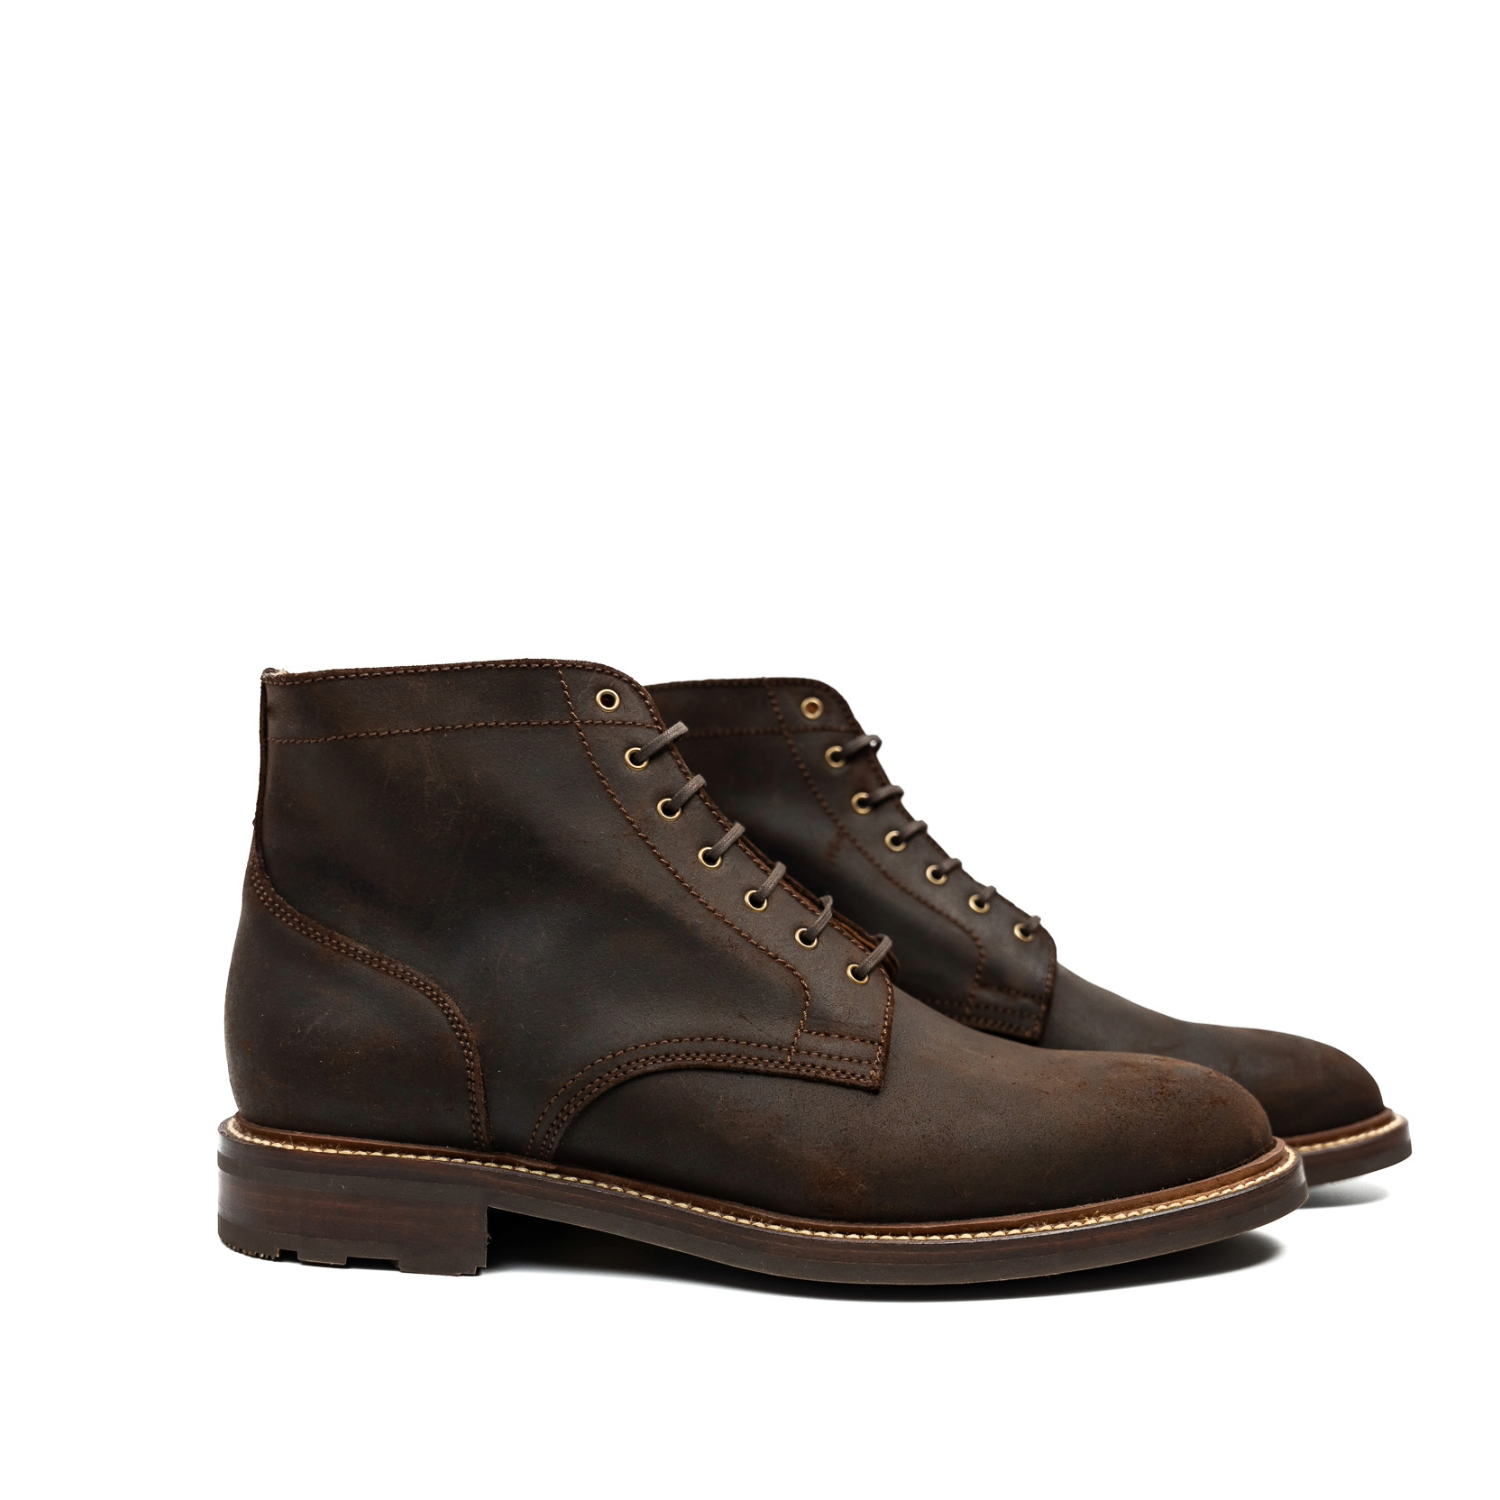 SALE – Caswell Boot Company